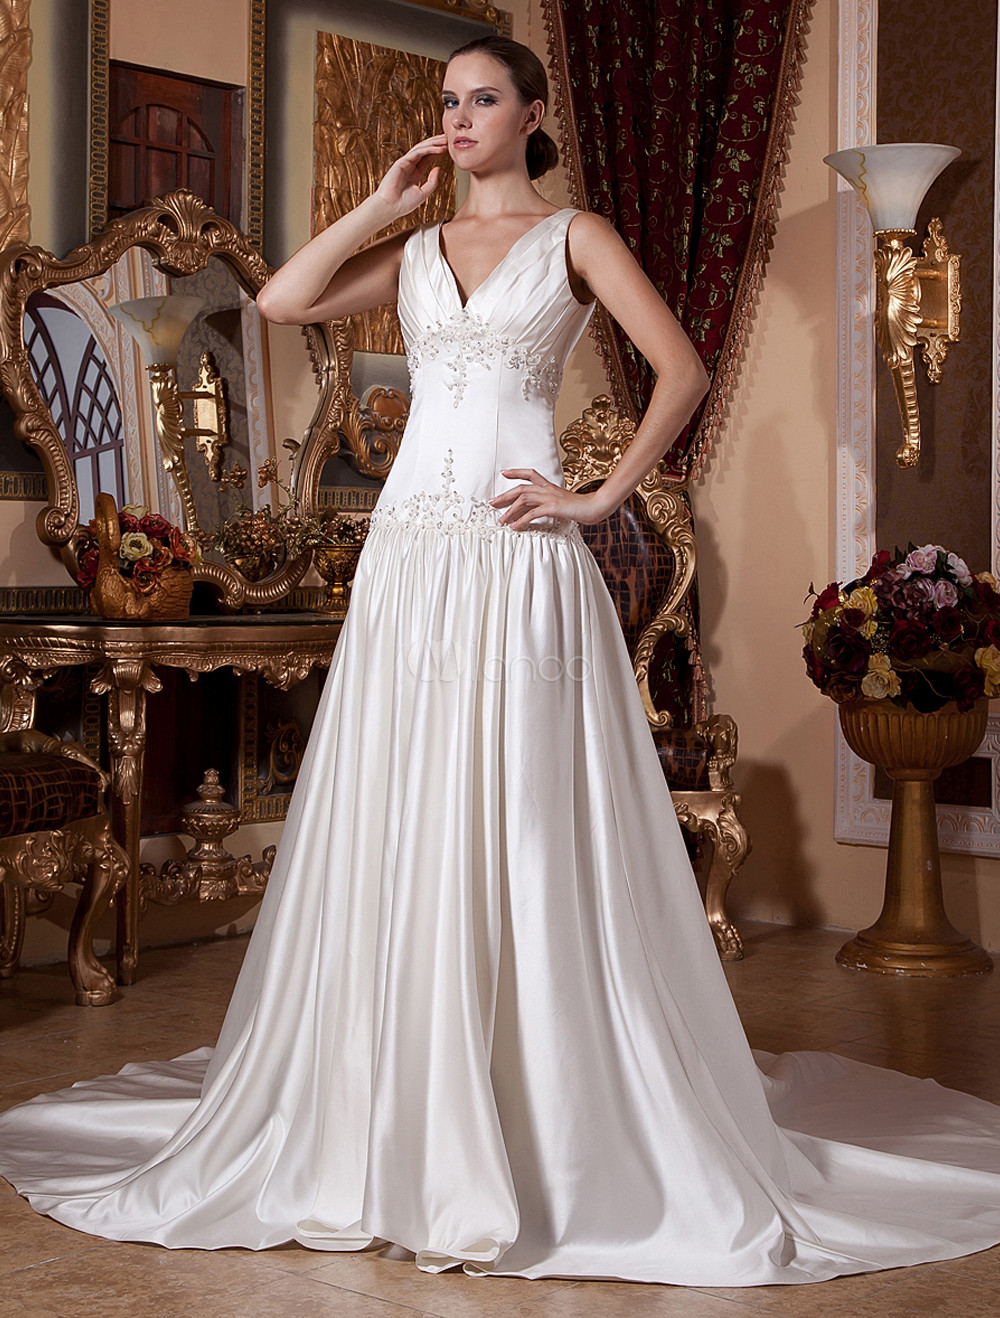 Best Slimming Wedding Dresses of the decade Learn more here 